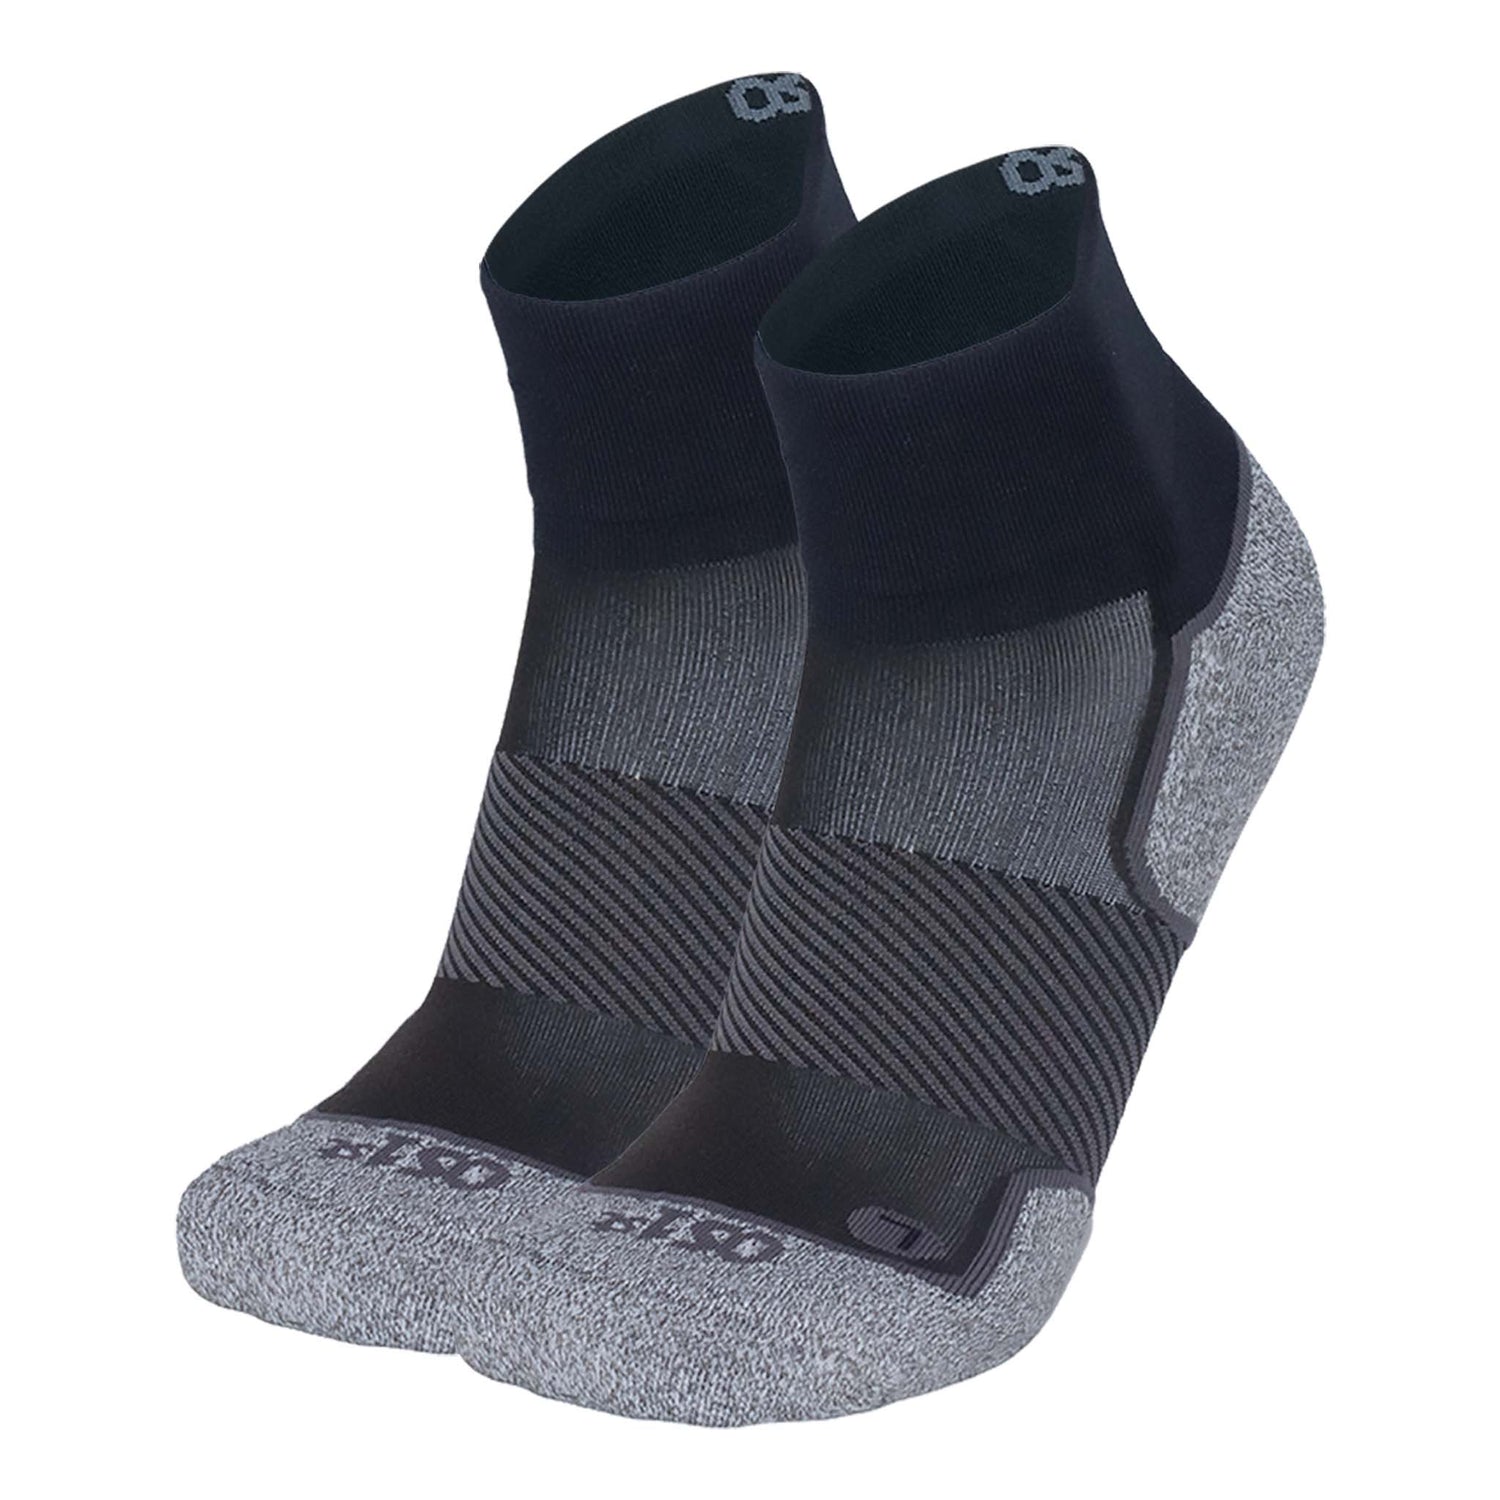 OS1st Active Comfort Socks by My Foot Guy are moisture wicking, breathable, have a left &amp; right design and compression